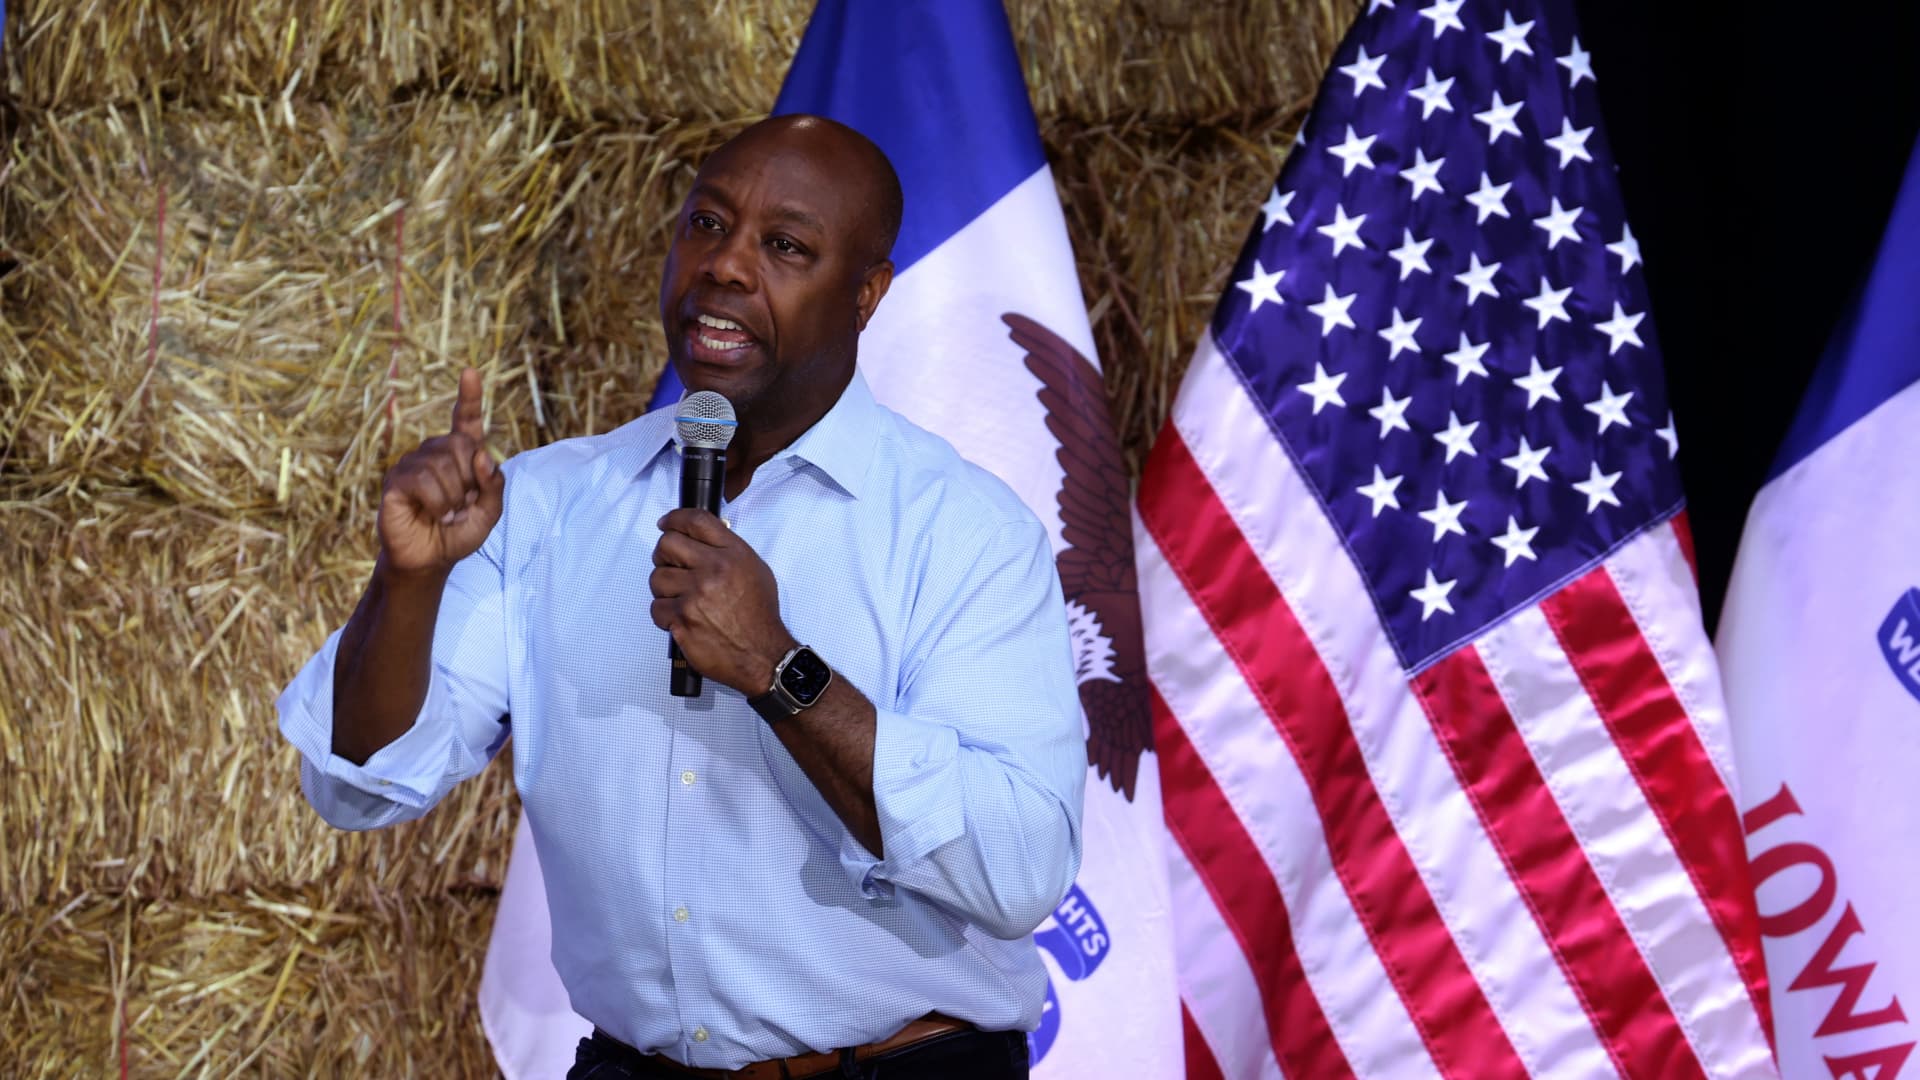 DES MOINES, IOWA - JUNE 03: Republican presidential candidate Senator Tim Scott (R-SC) speaks to guest during the Joni Ernst's Roast and Ride event on June 03, 2023 in Des Moines, Iowa. 